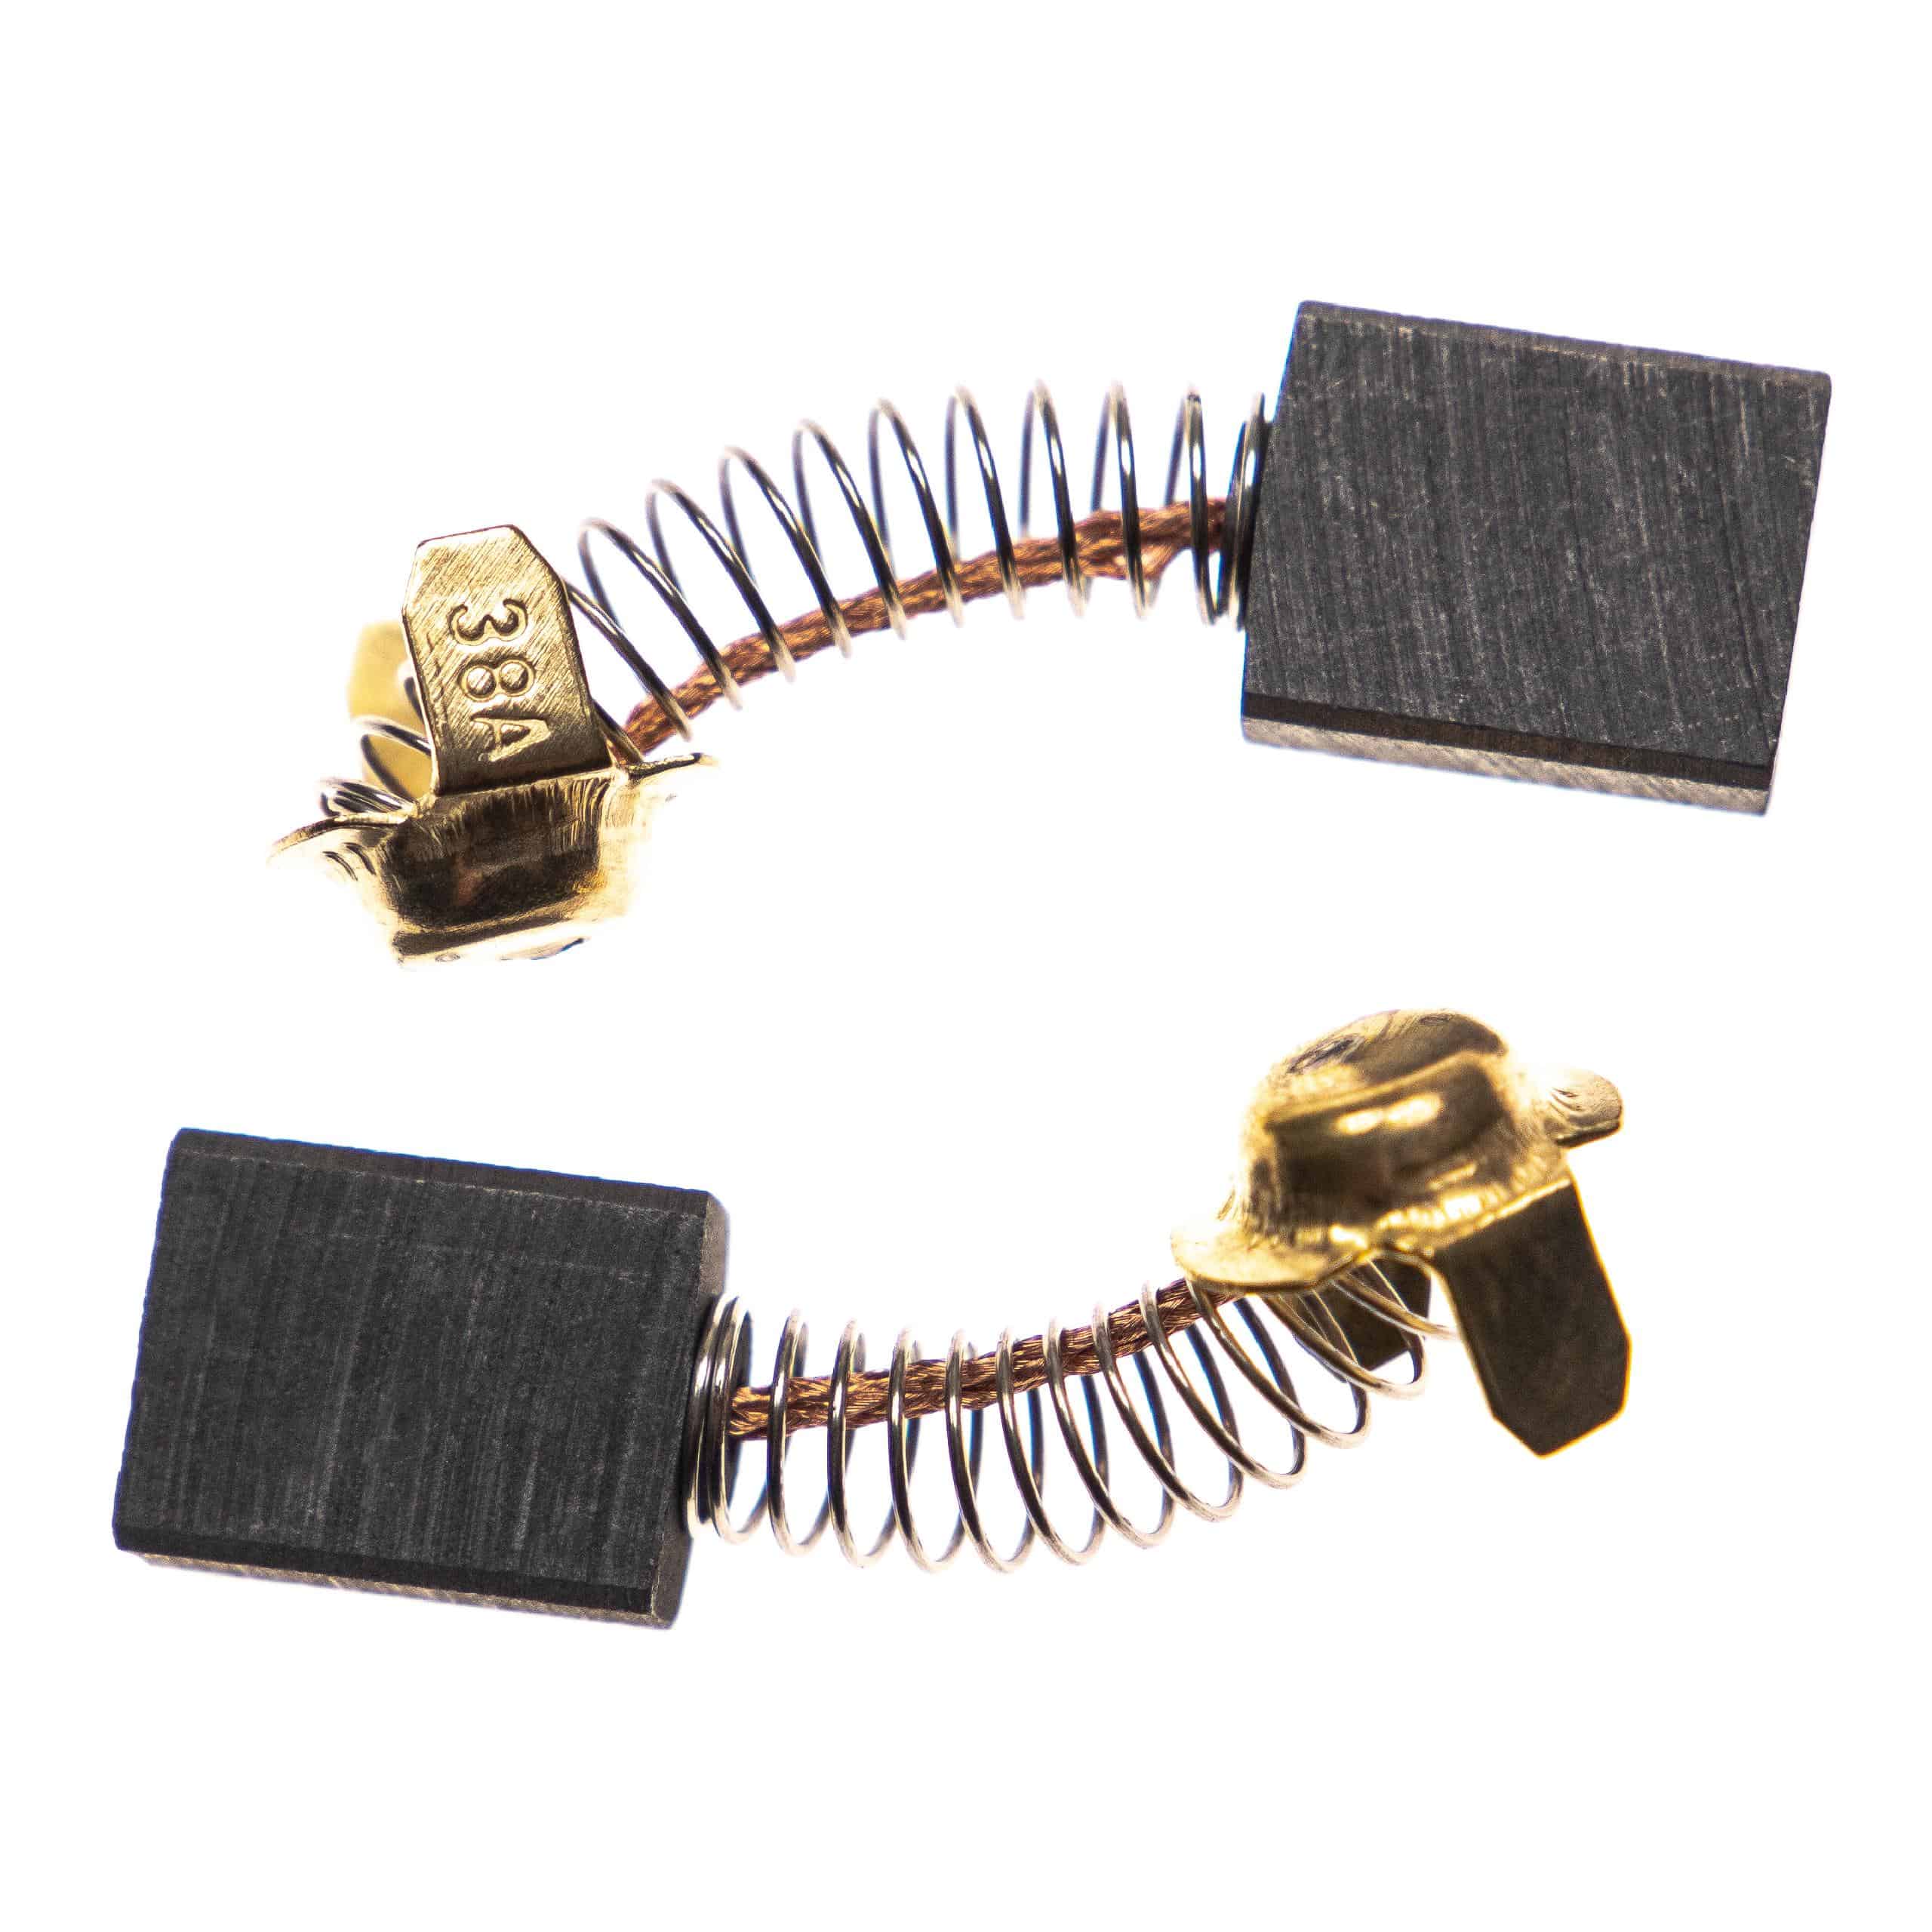 2x Carbon Brush as Replacement for Hitachi 999-065 Electric Power Tools + Spring, 16.5 x 13 x 7mm